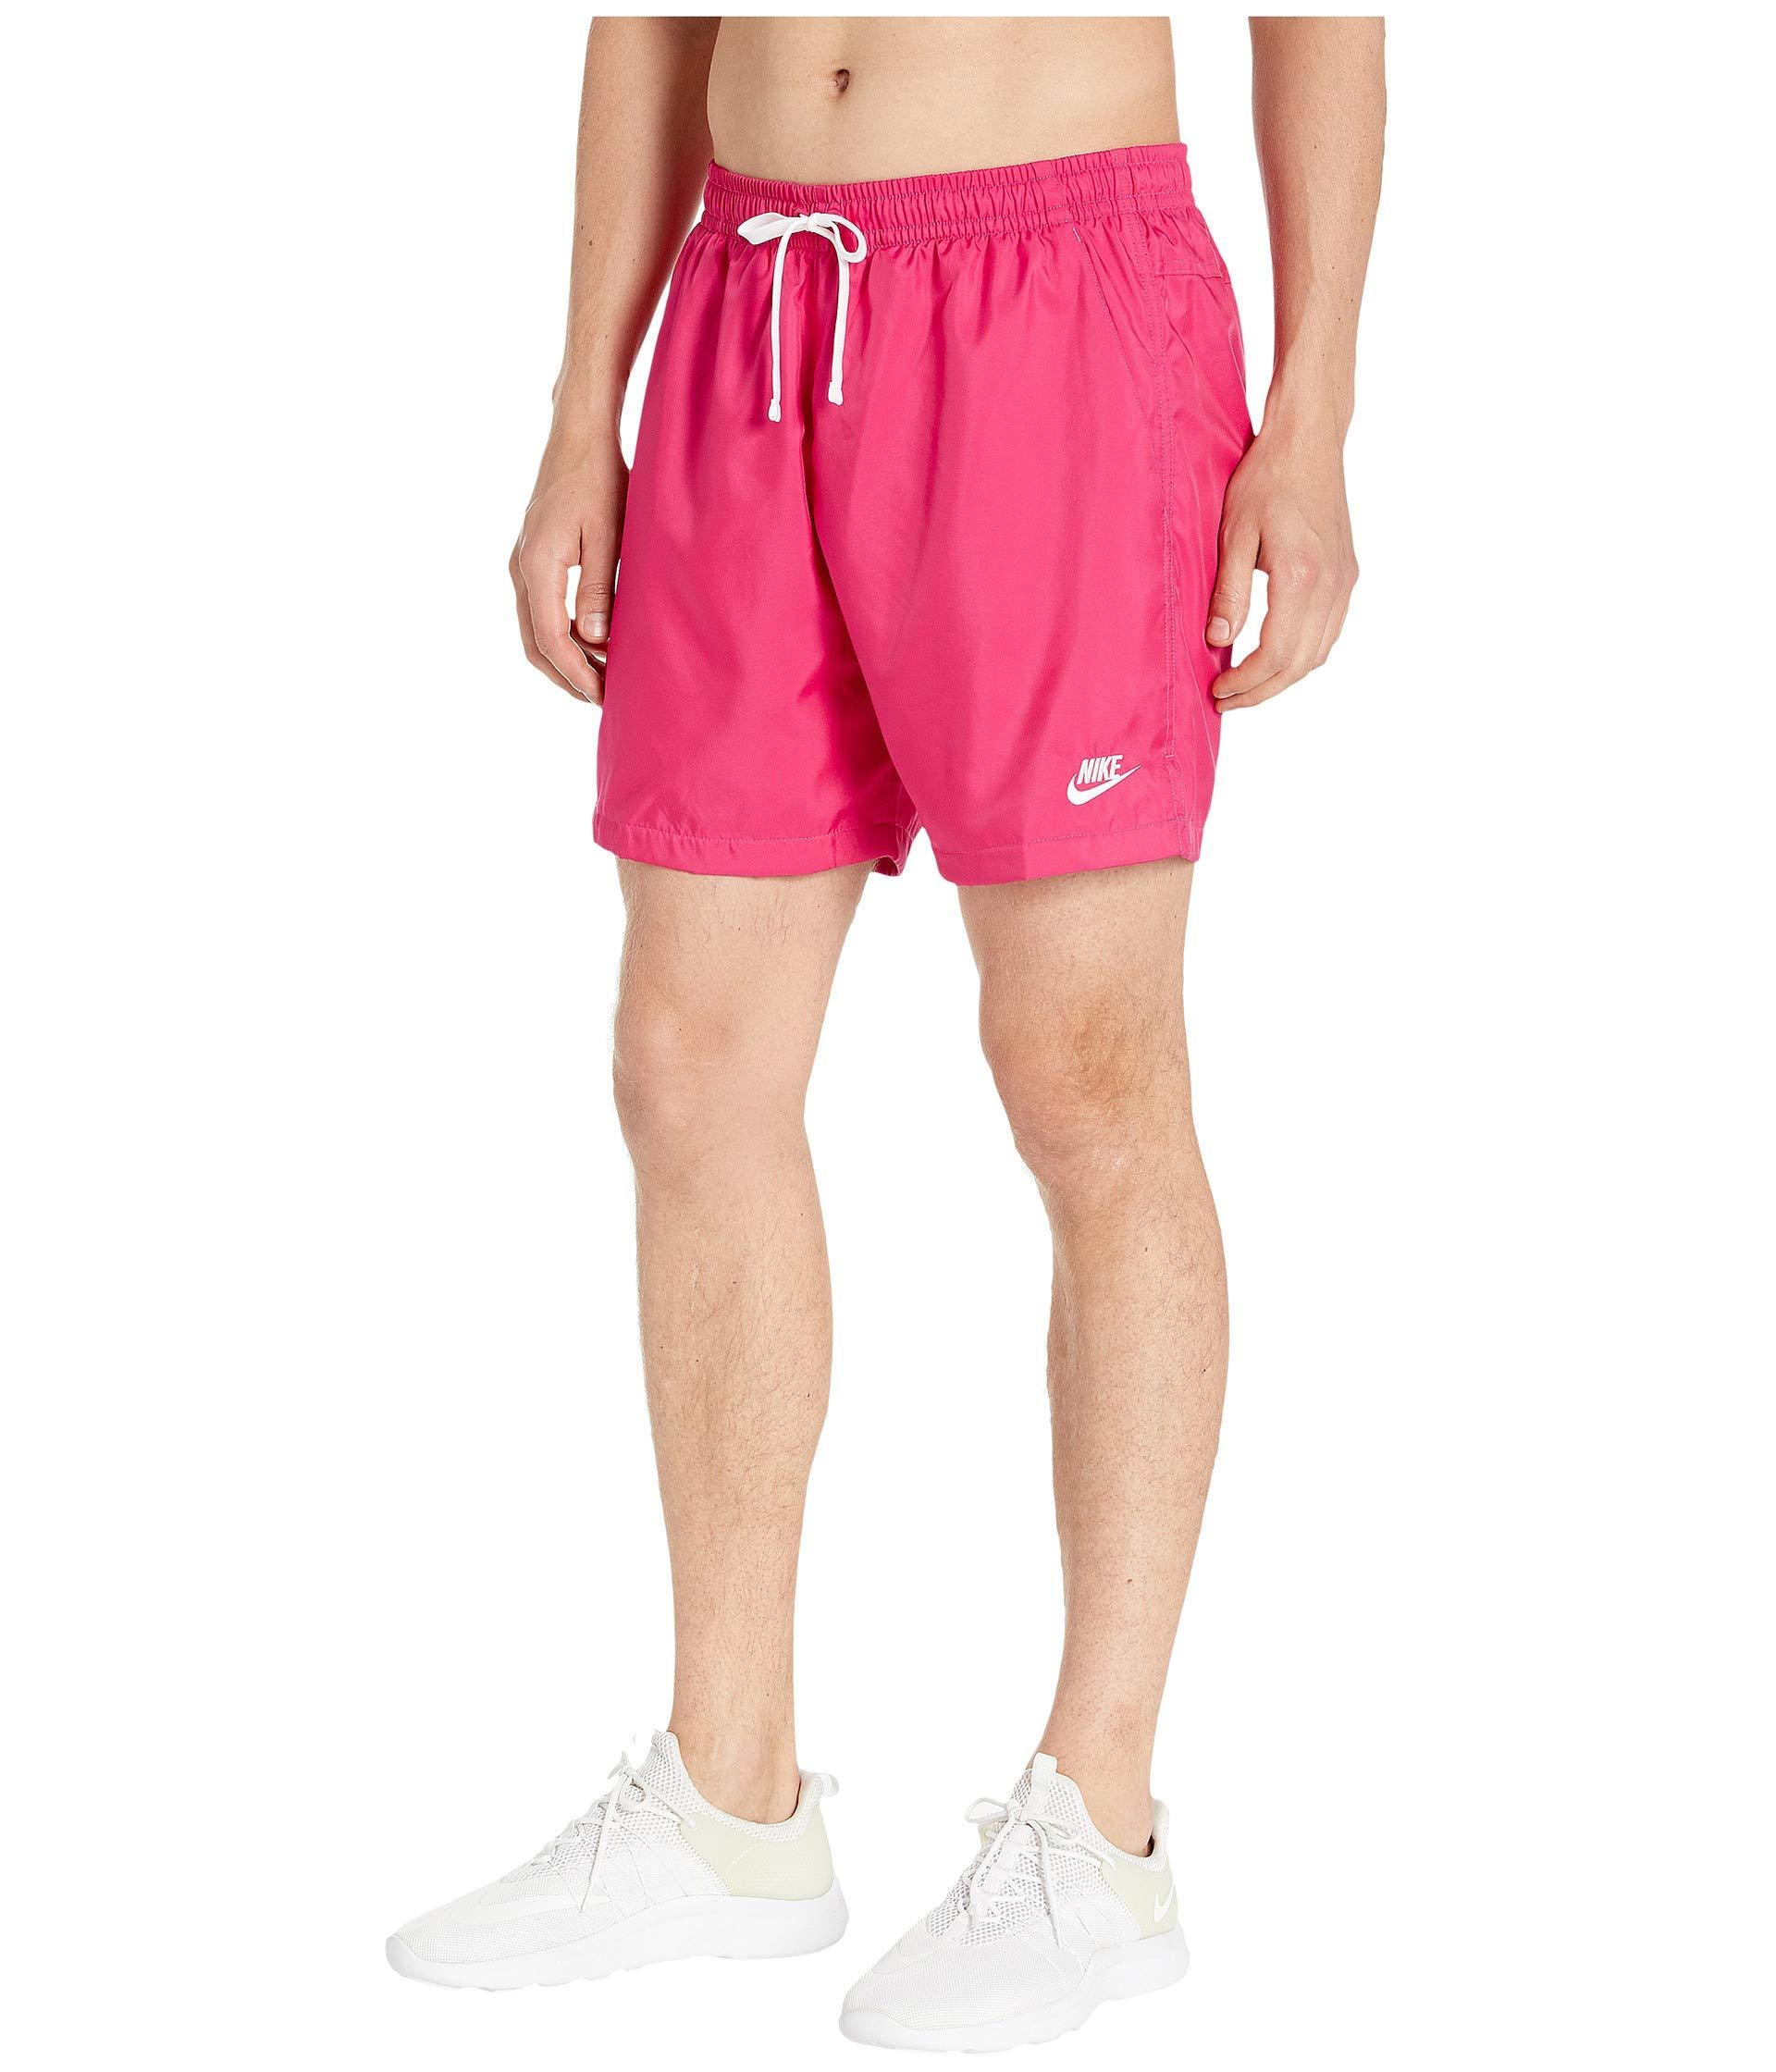 Flow Swim Shorts Pink for Lyst